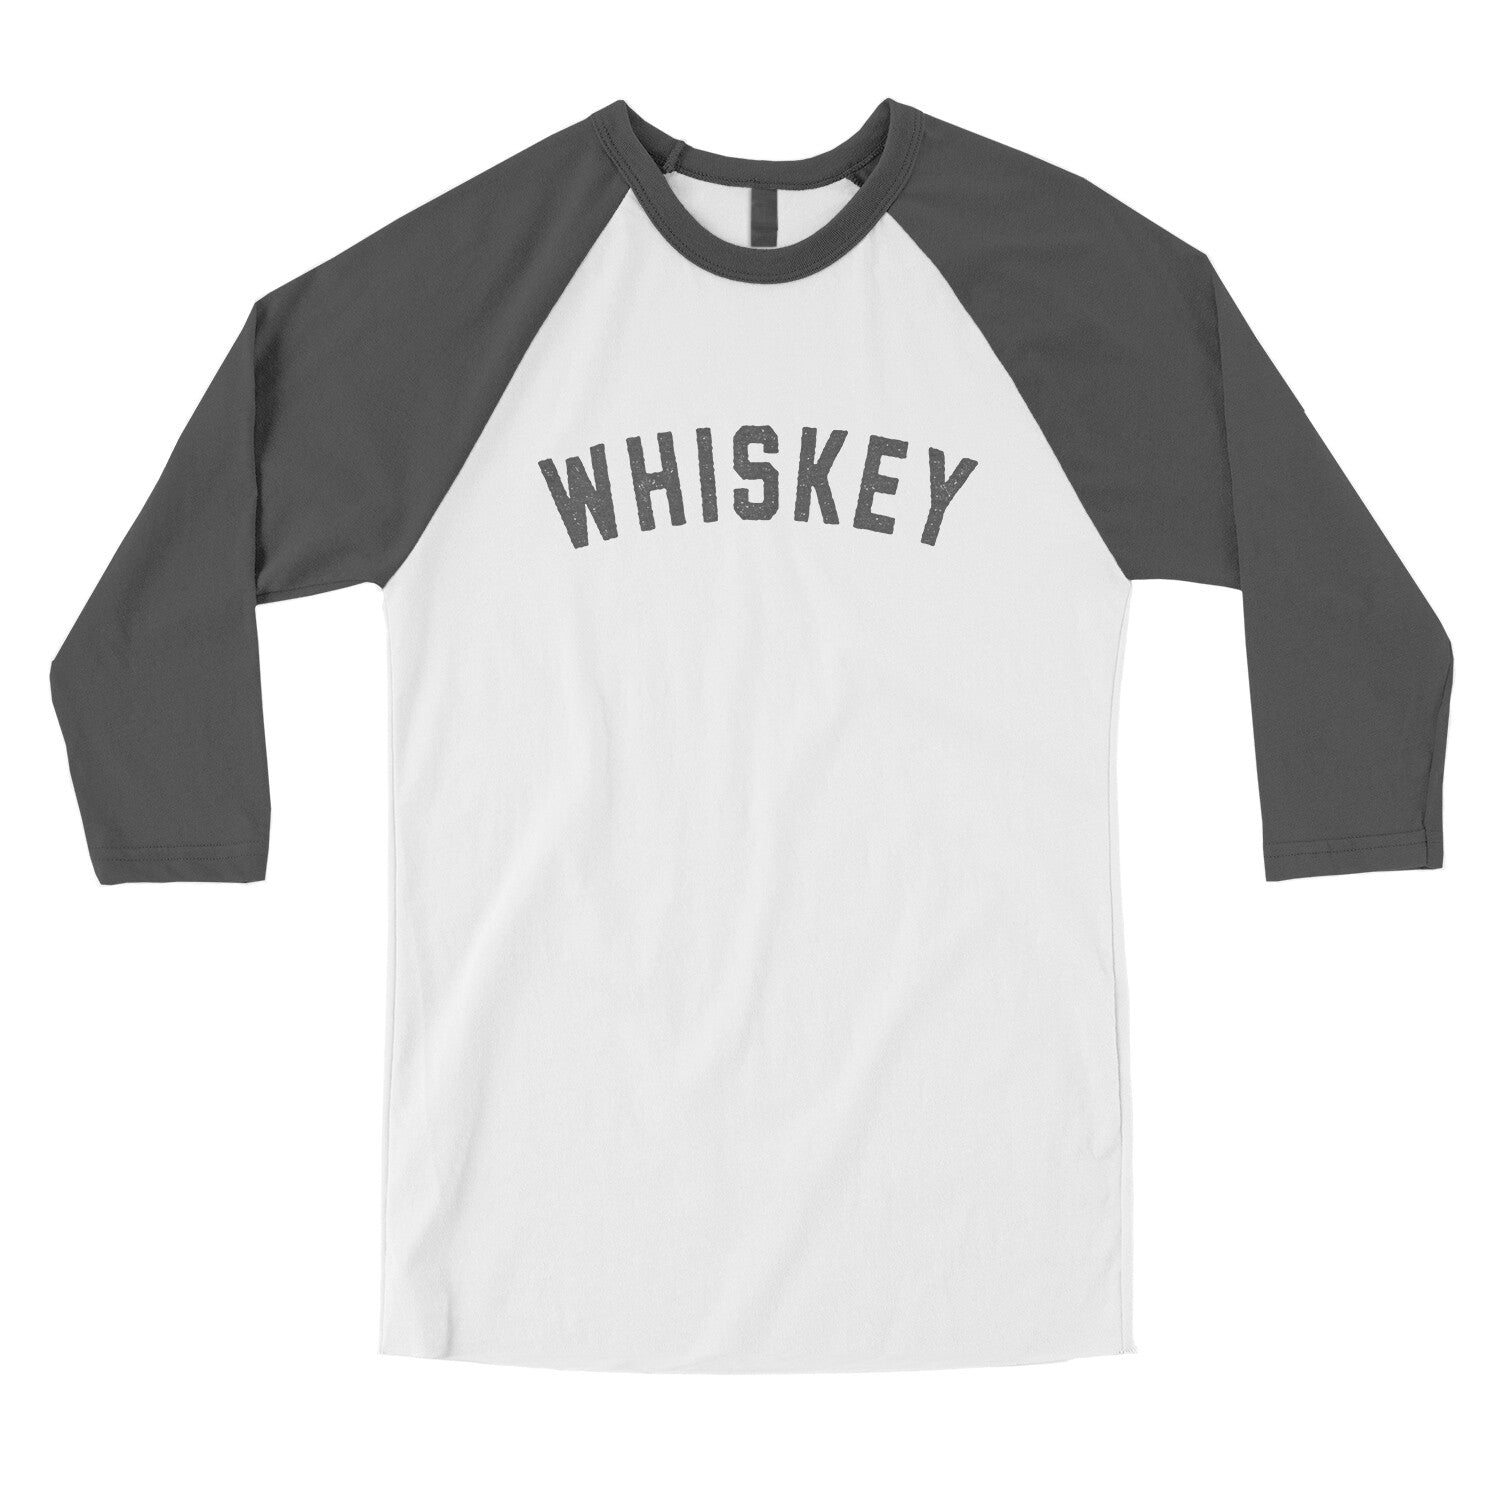 Whiskey in White with Asphalt Color